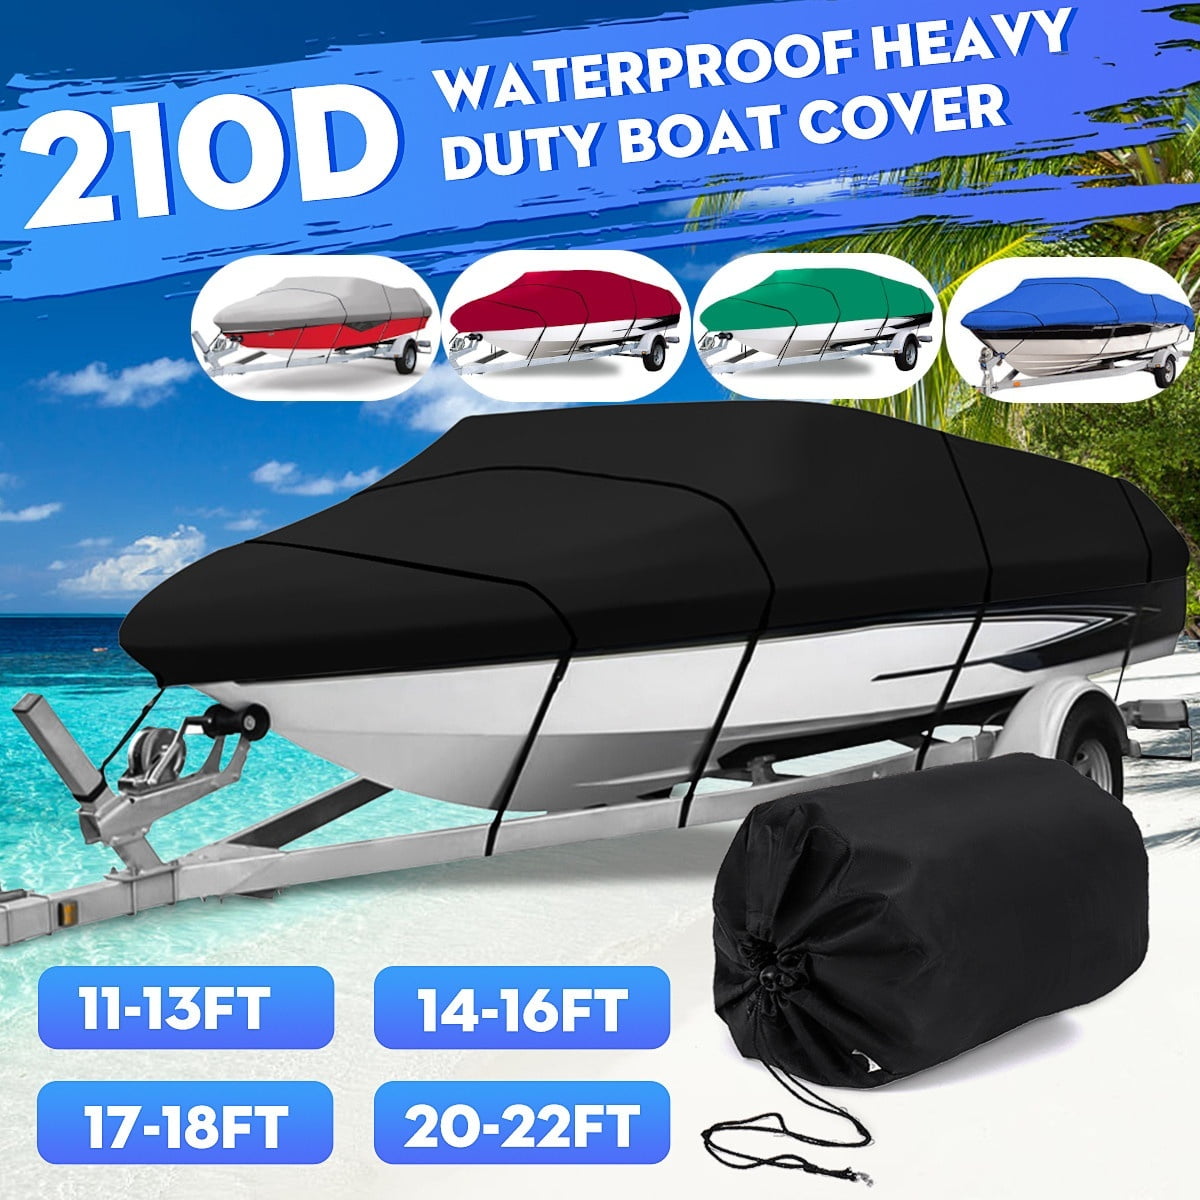 Boat Cover Heavy Duty 210D Polyester Waterproof UV Resistant Marine Grade Bass Boat Cover Durable and Tear Proof,Fits V-Hull Tri-Hull Fishing Ski Pro-Style Bass Boats Blue,11-13ft 